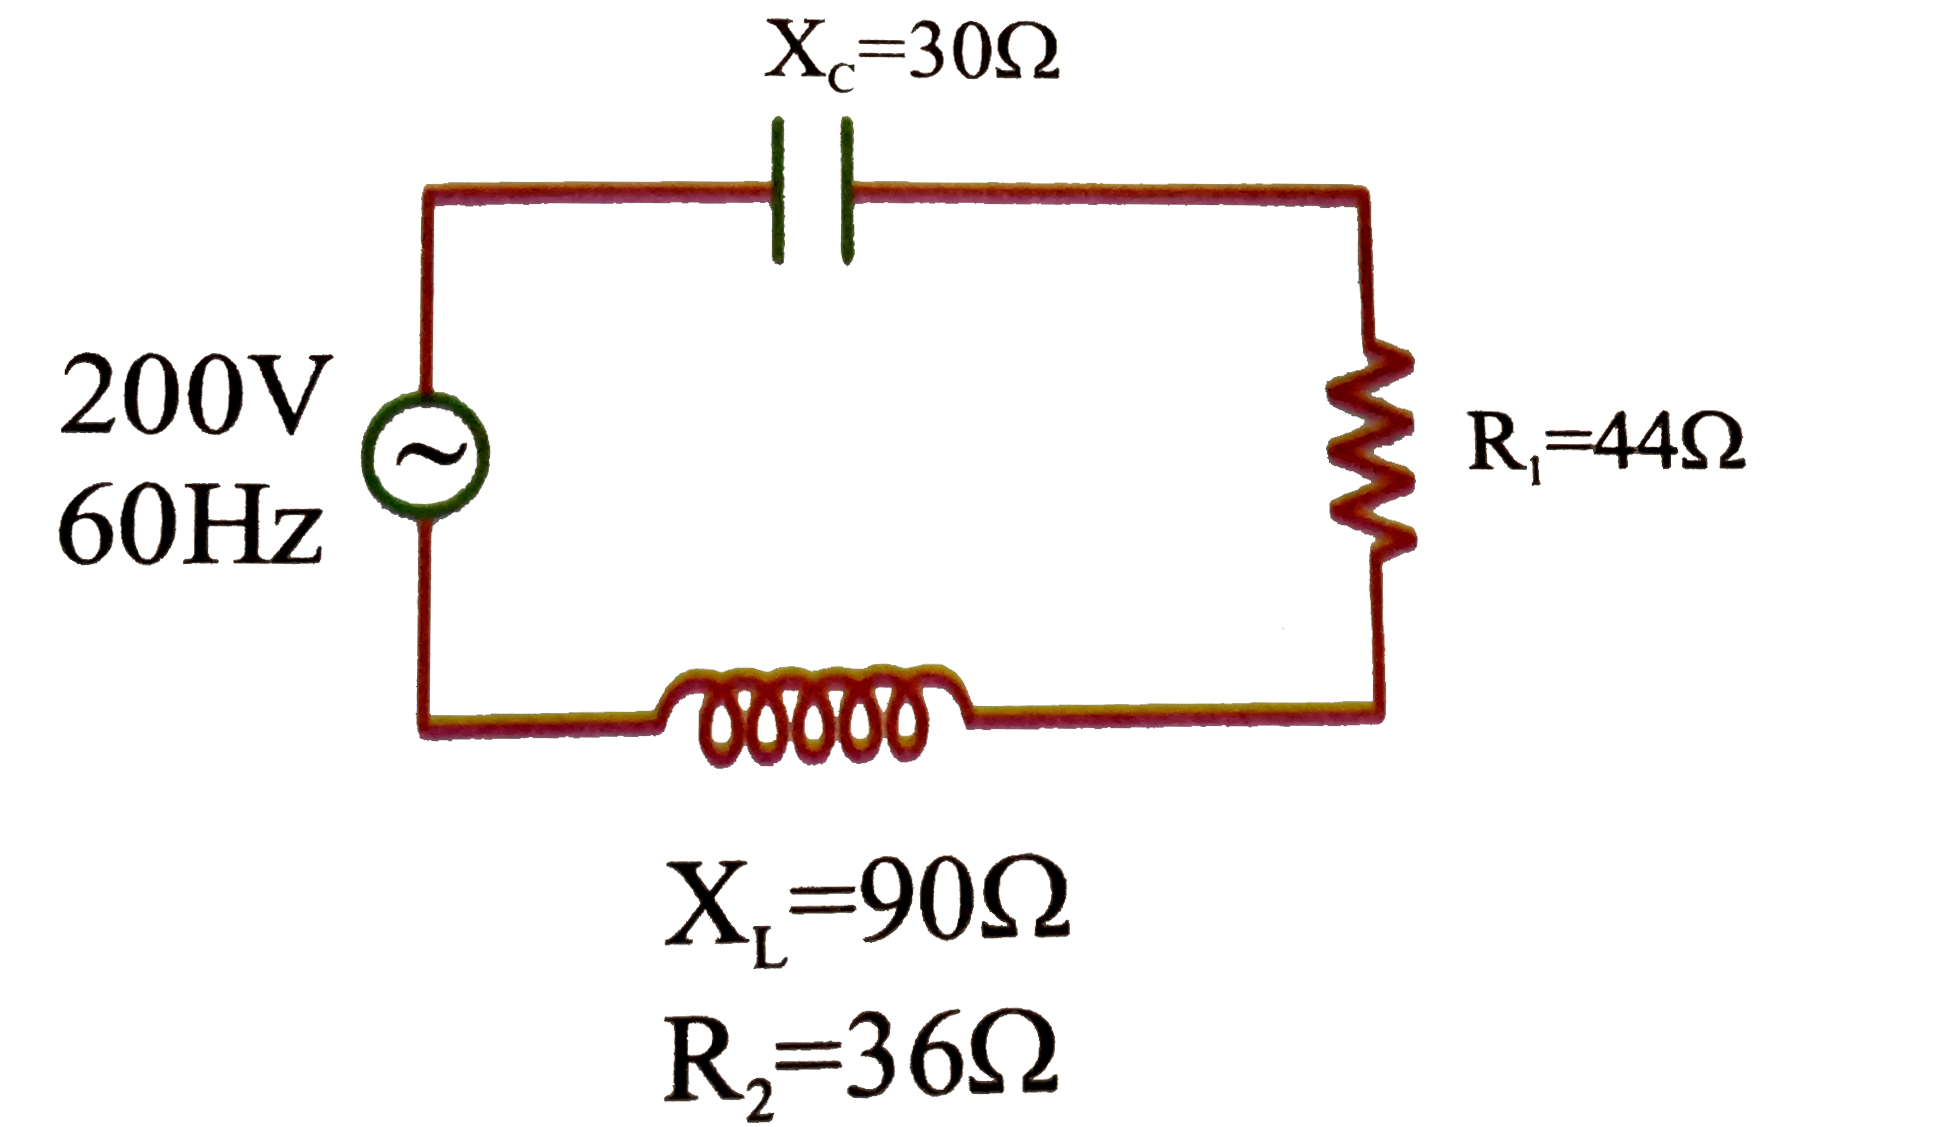 A series circuit connected across a 200 V, 60 Hz line consists of a capacitive reactance 30 Omega non inductive resistor of 44 Omega and a coil of inductive reactance 90 Omega and resistance 36 Omega as shown in the diagram       The power dissipated in the inductance coil is